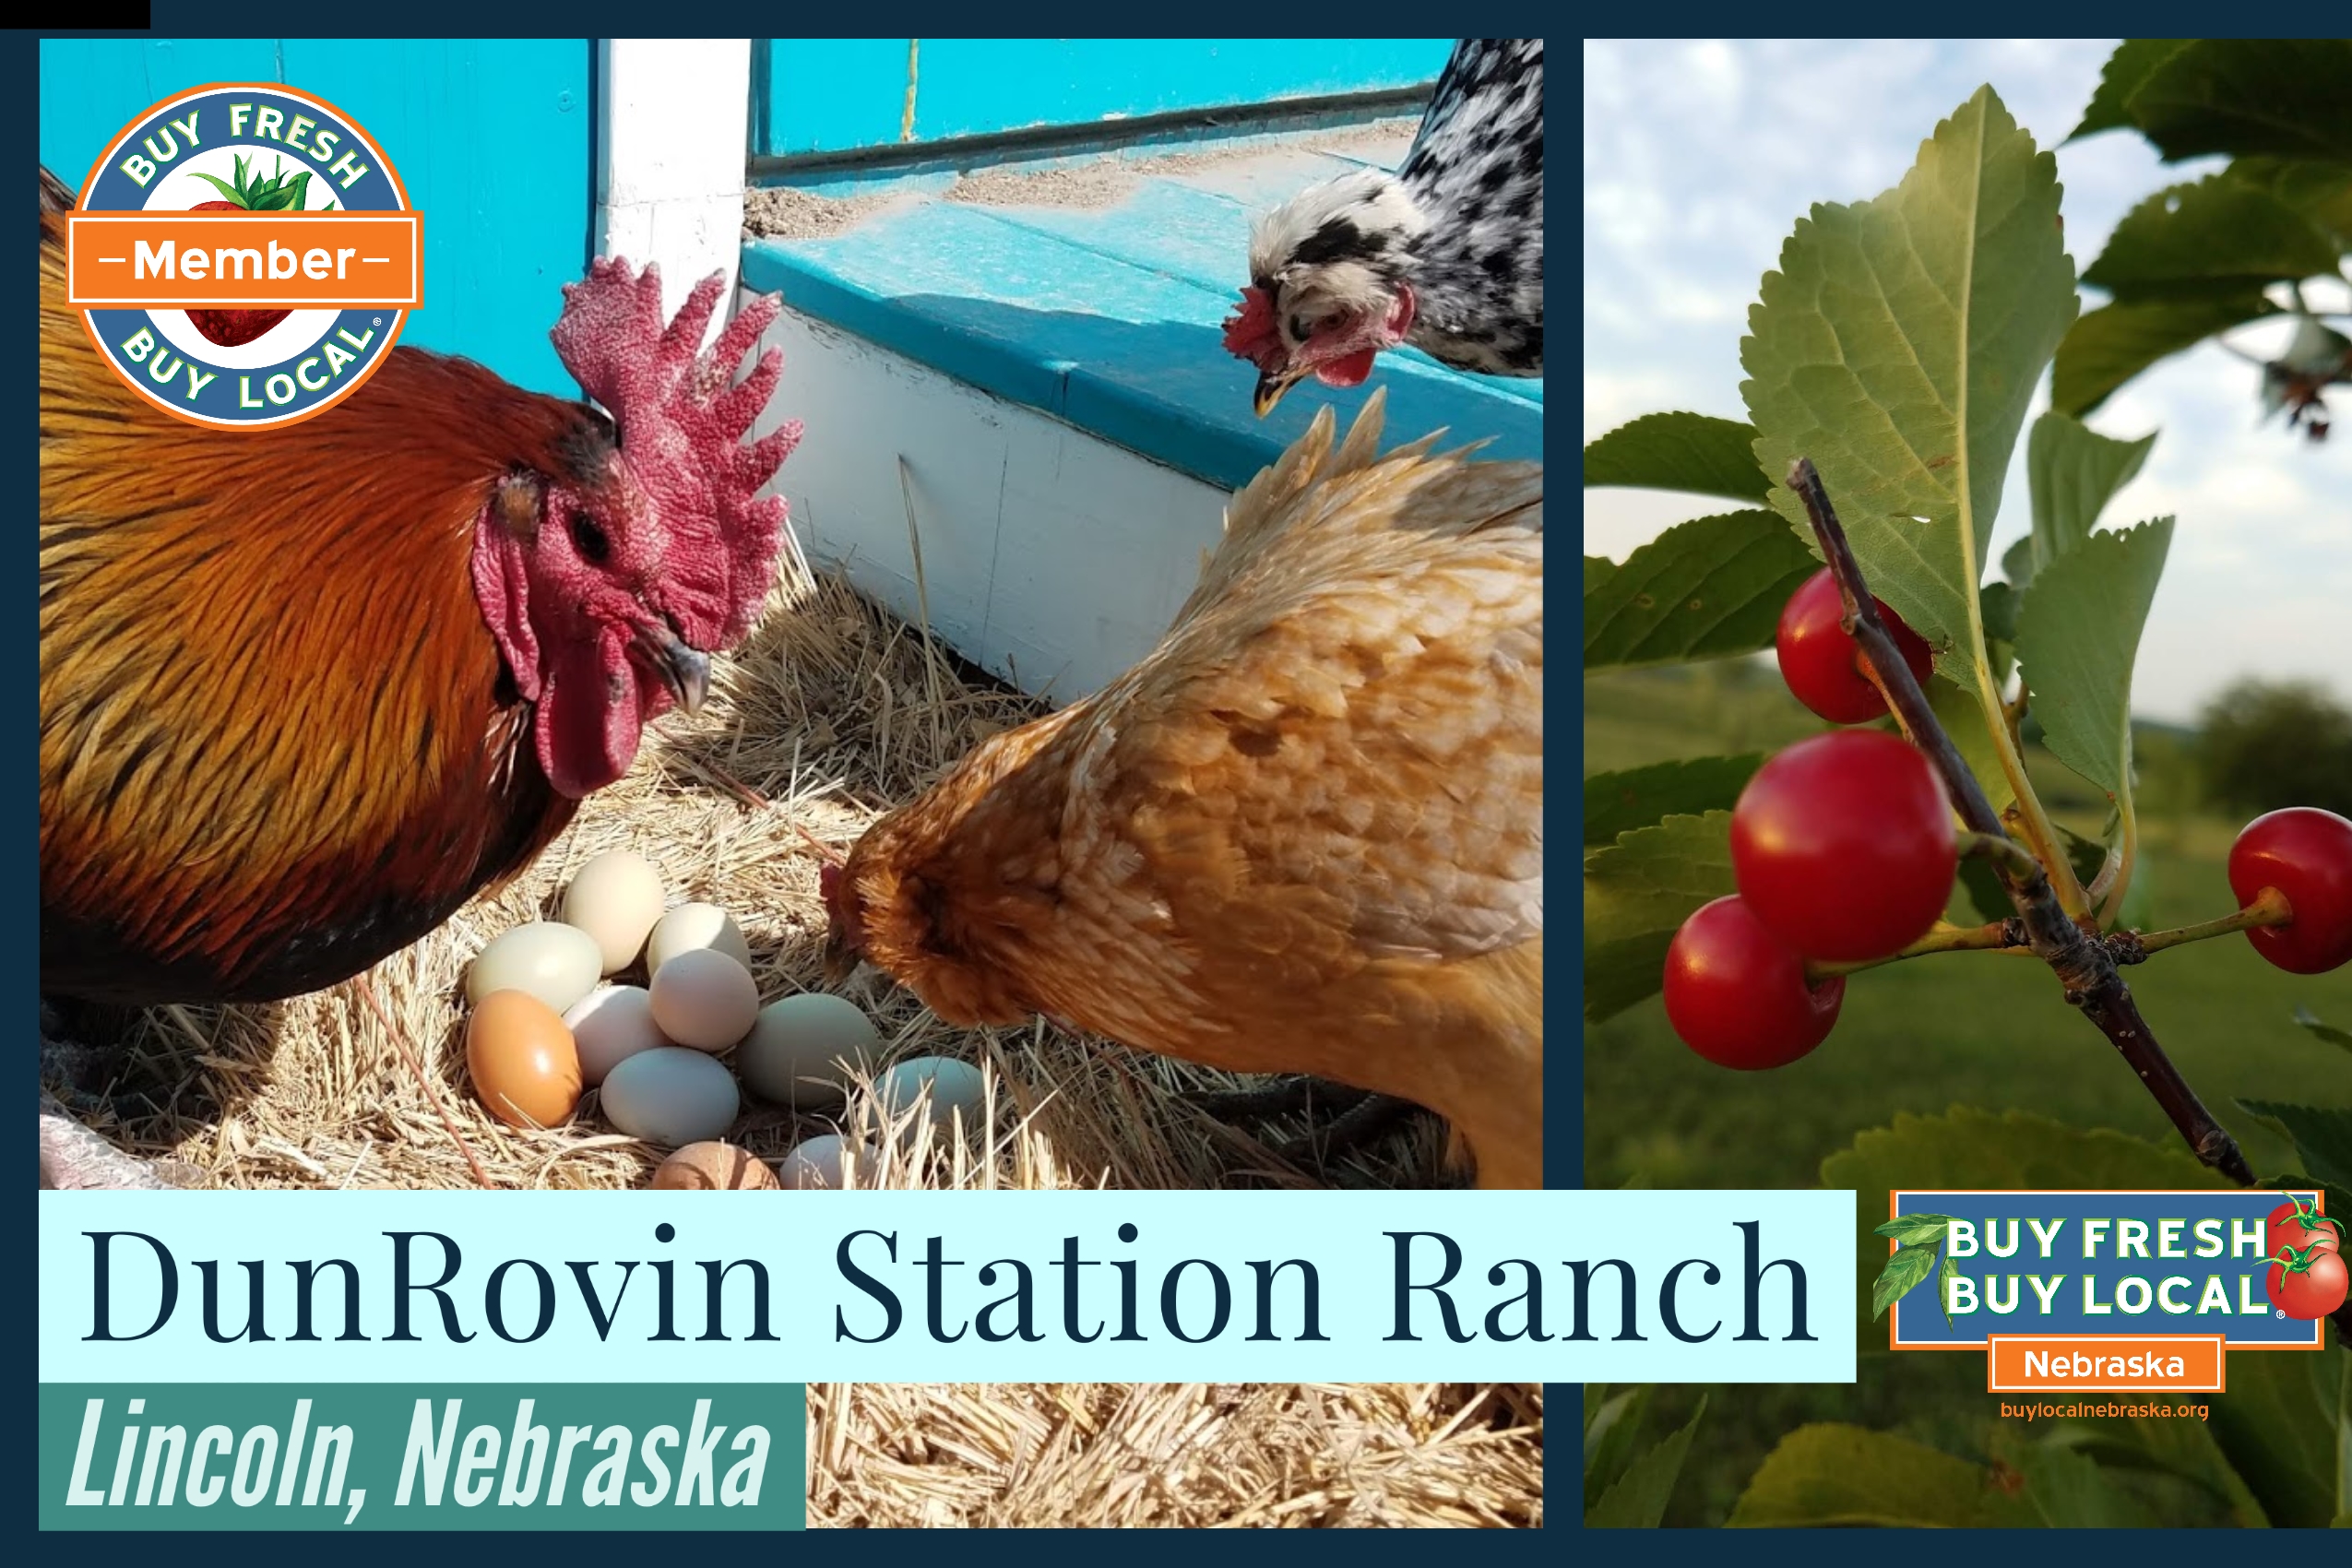 DunRovin Station Ranch Promotional Image